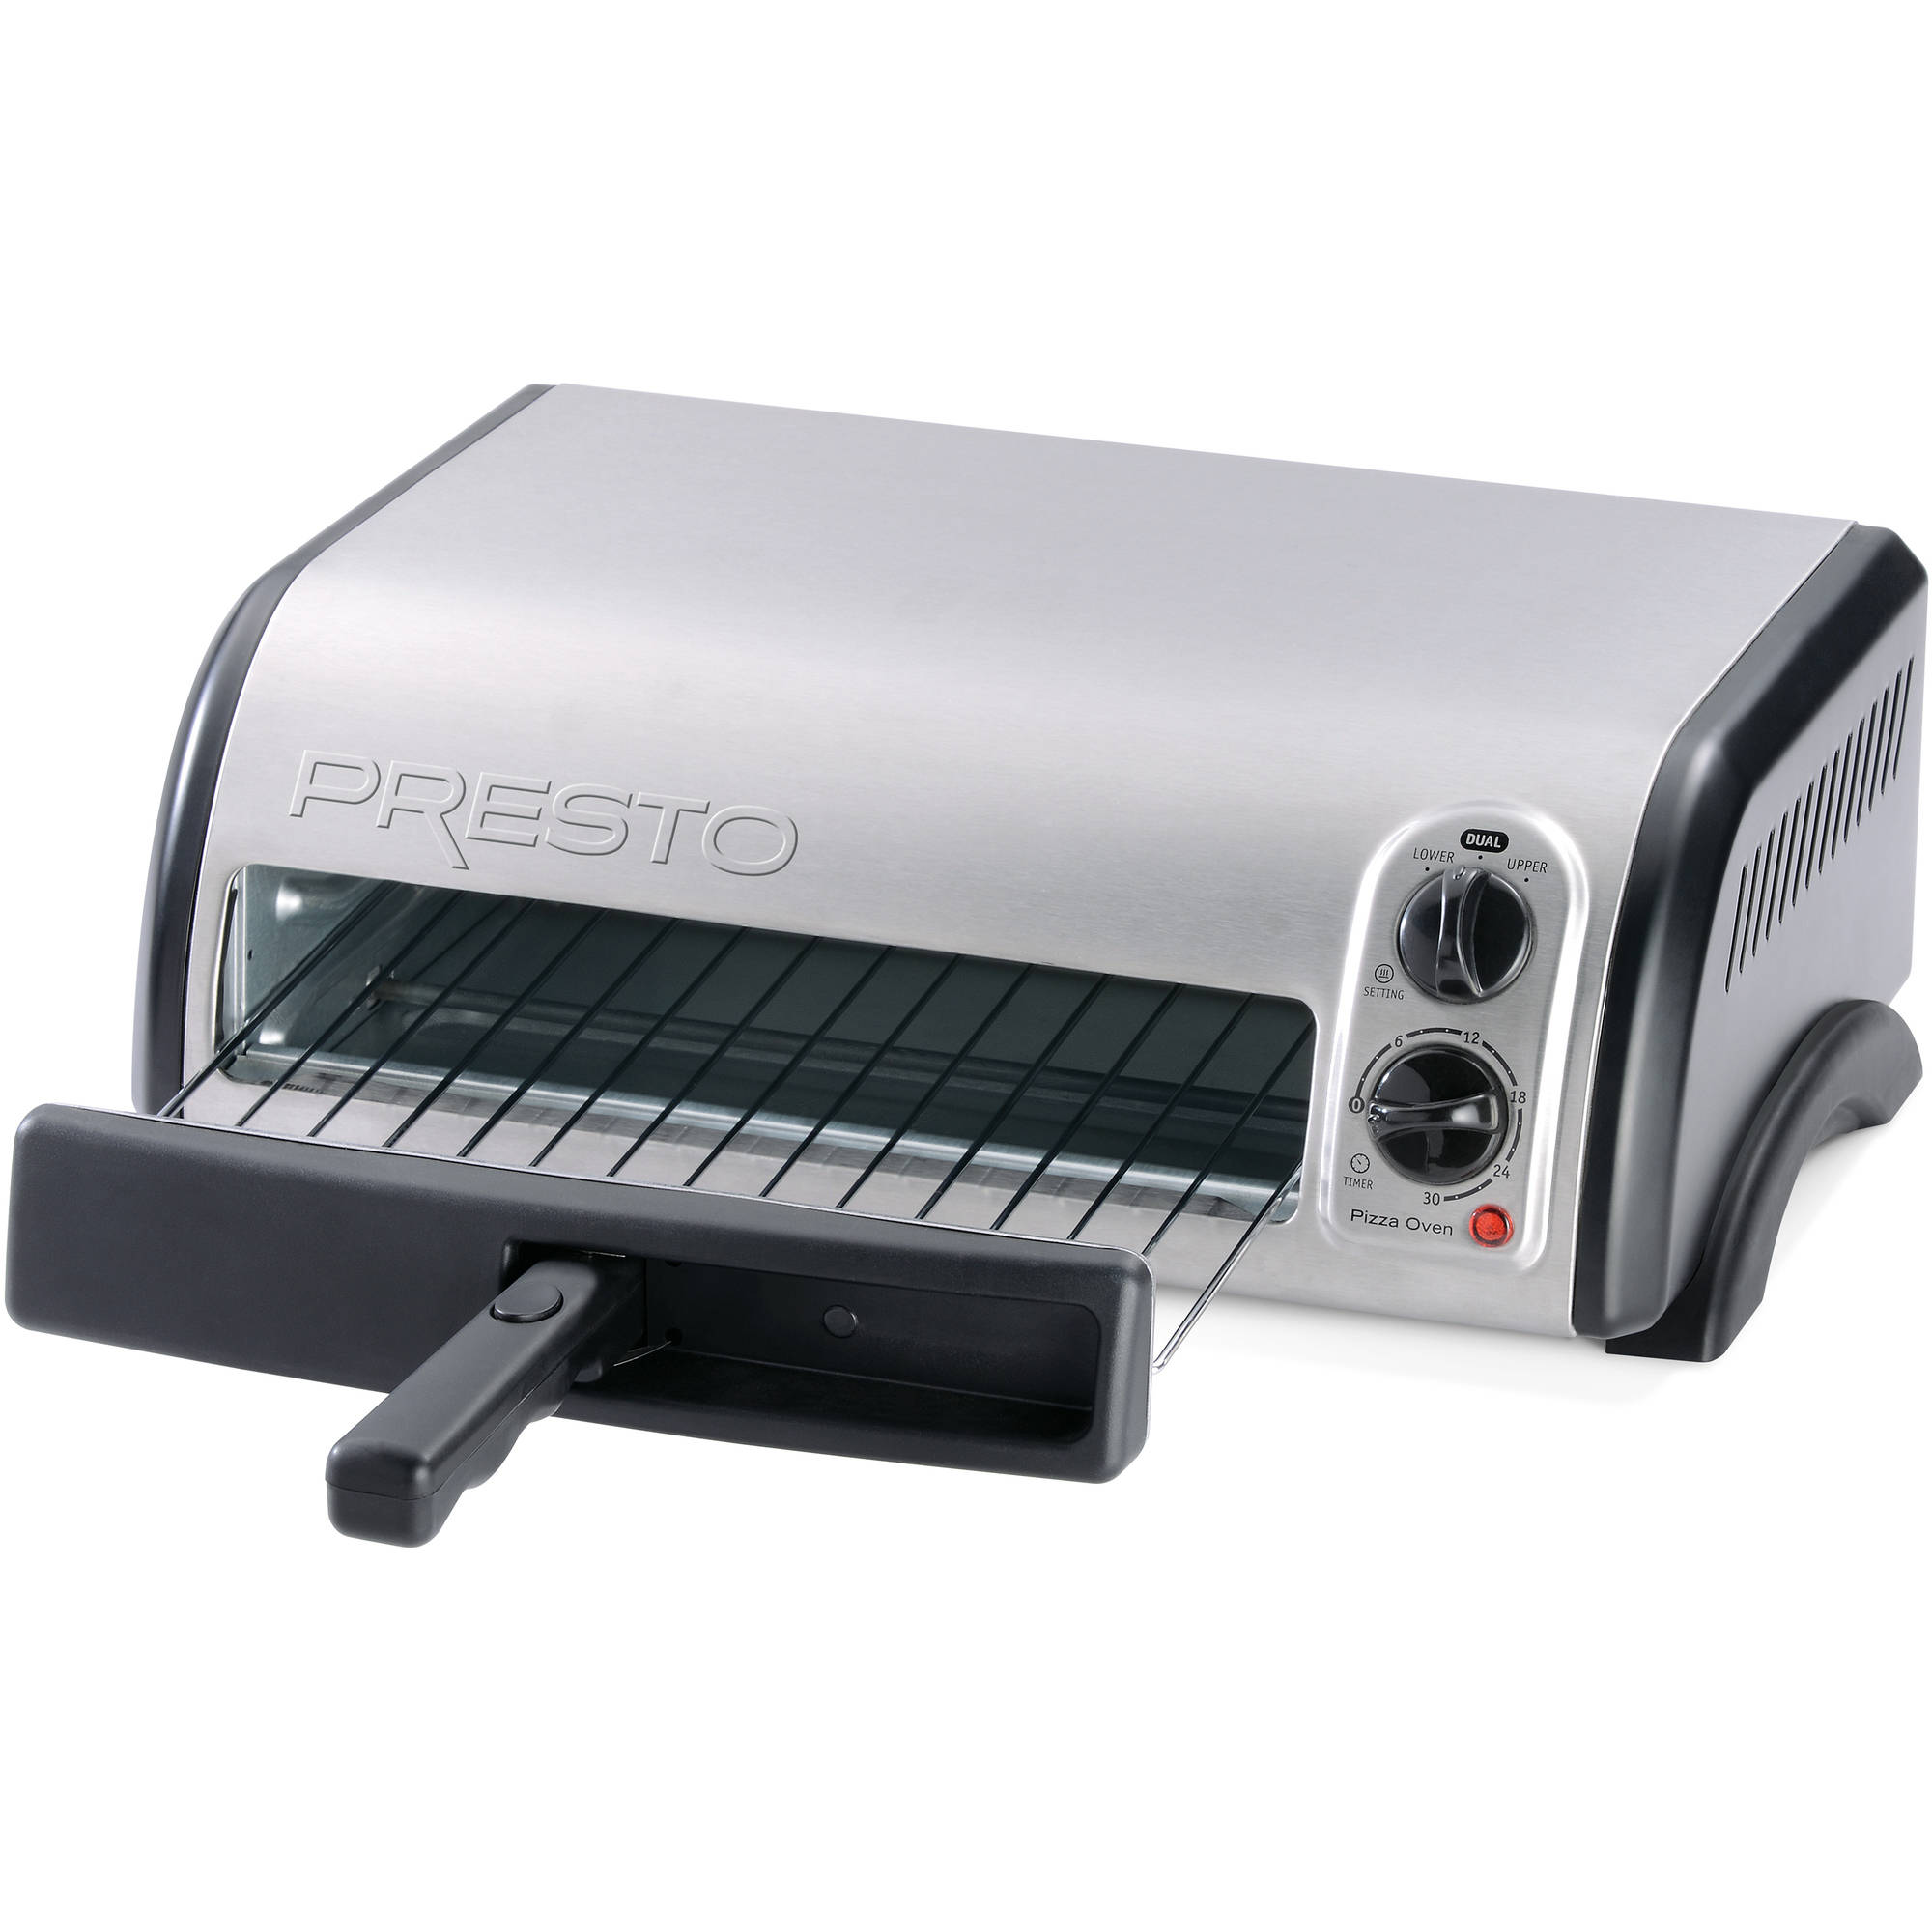 Presto Stainless Steel Pizza Oven 03436 - image 2 of 4